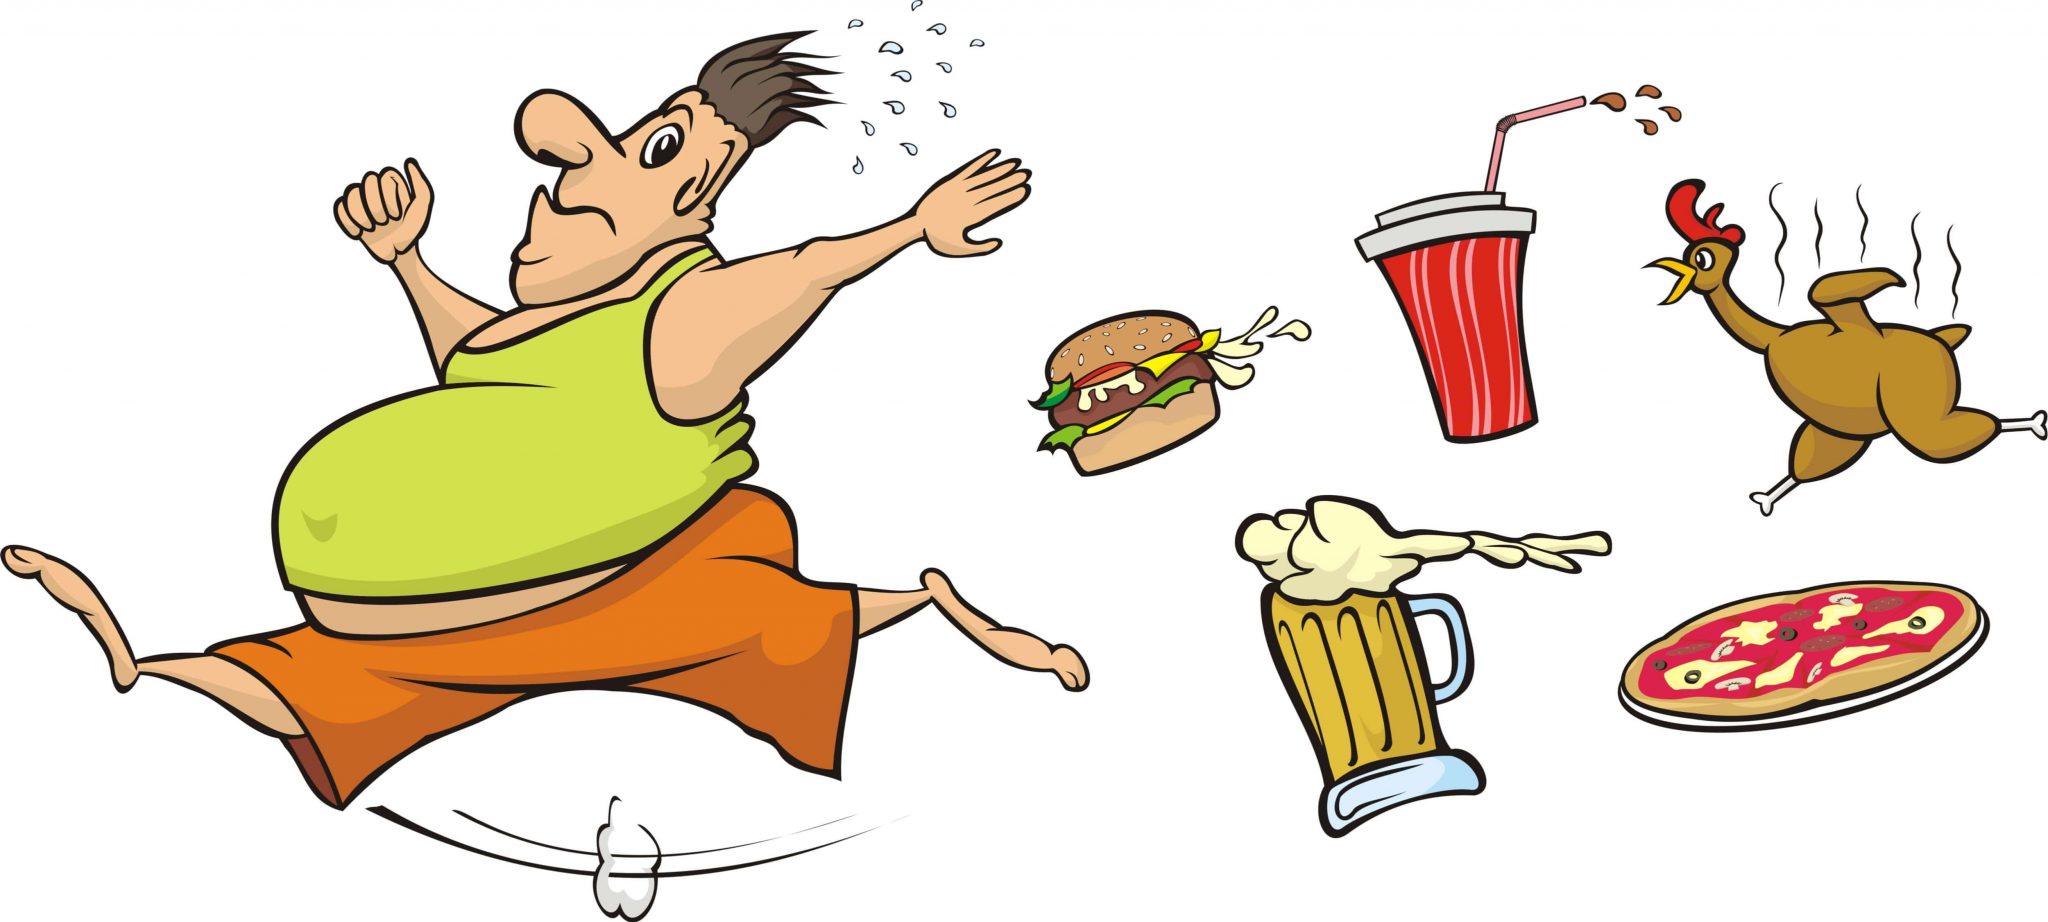 Image of a fat man chased by a pizza, a coke, a hamburger, a chicken, and a beer